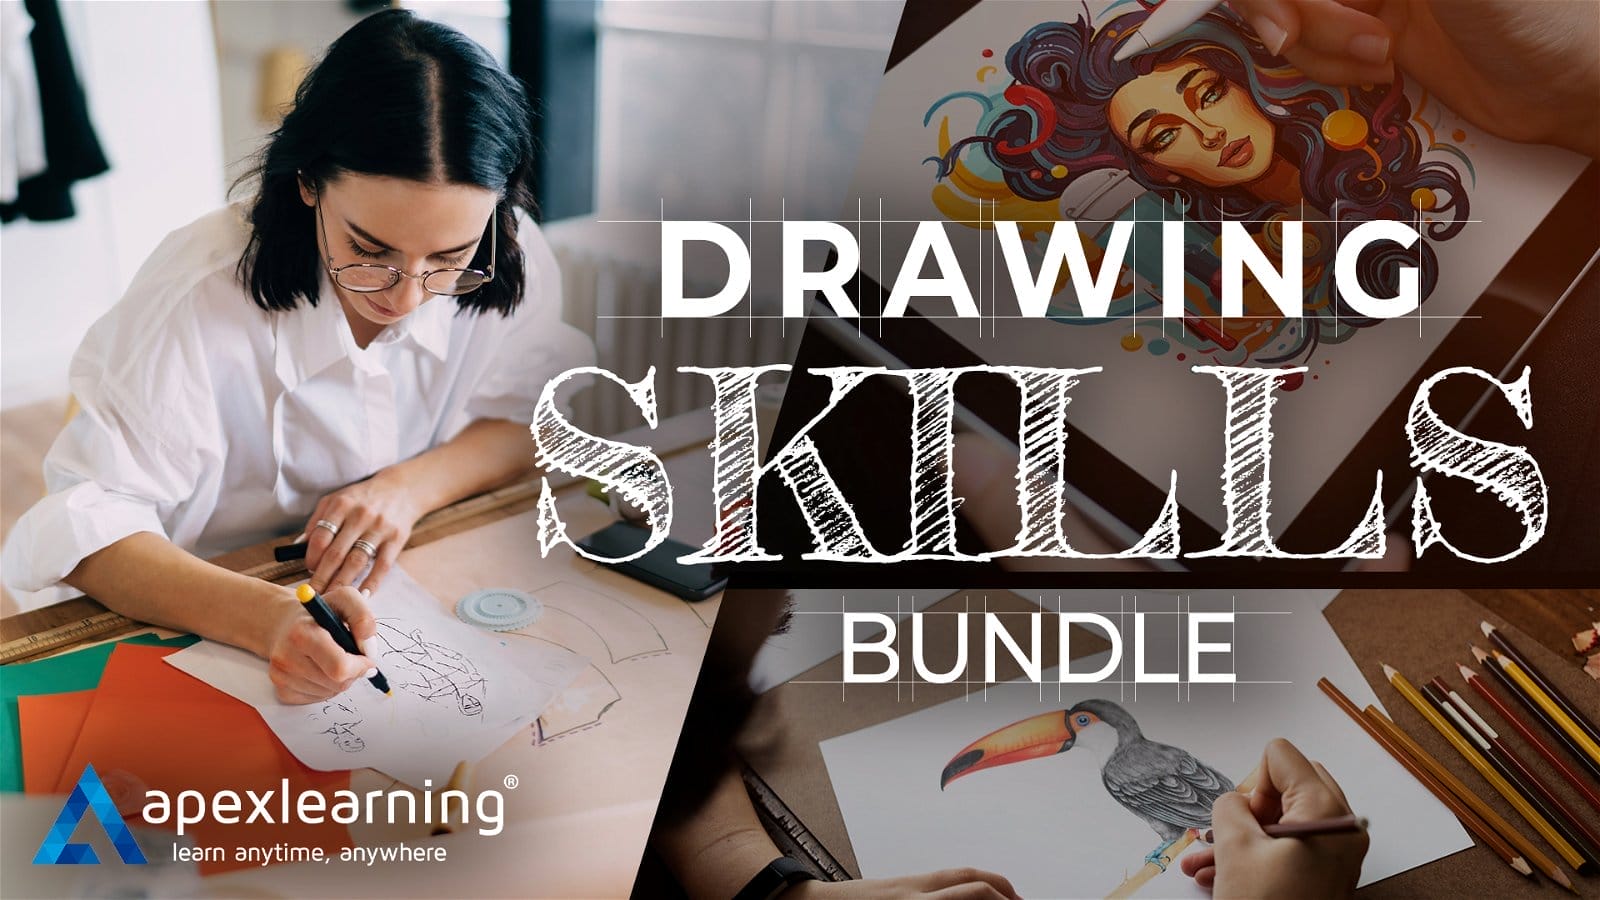 Drawing Skills Bundle with apexlearning